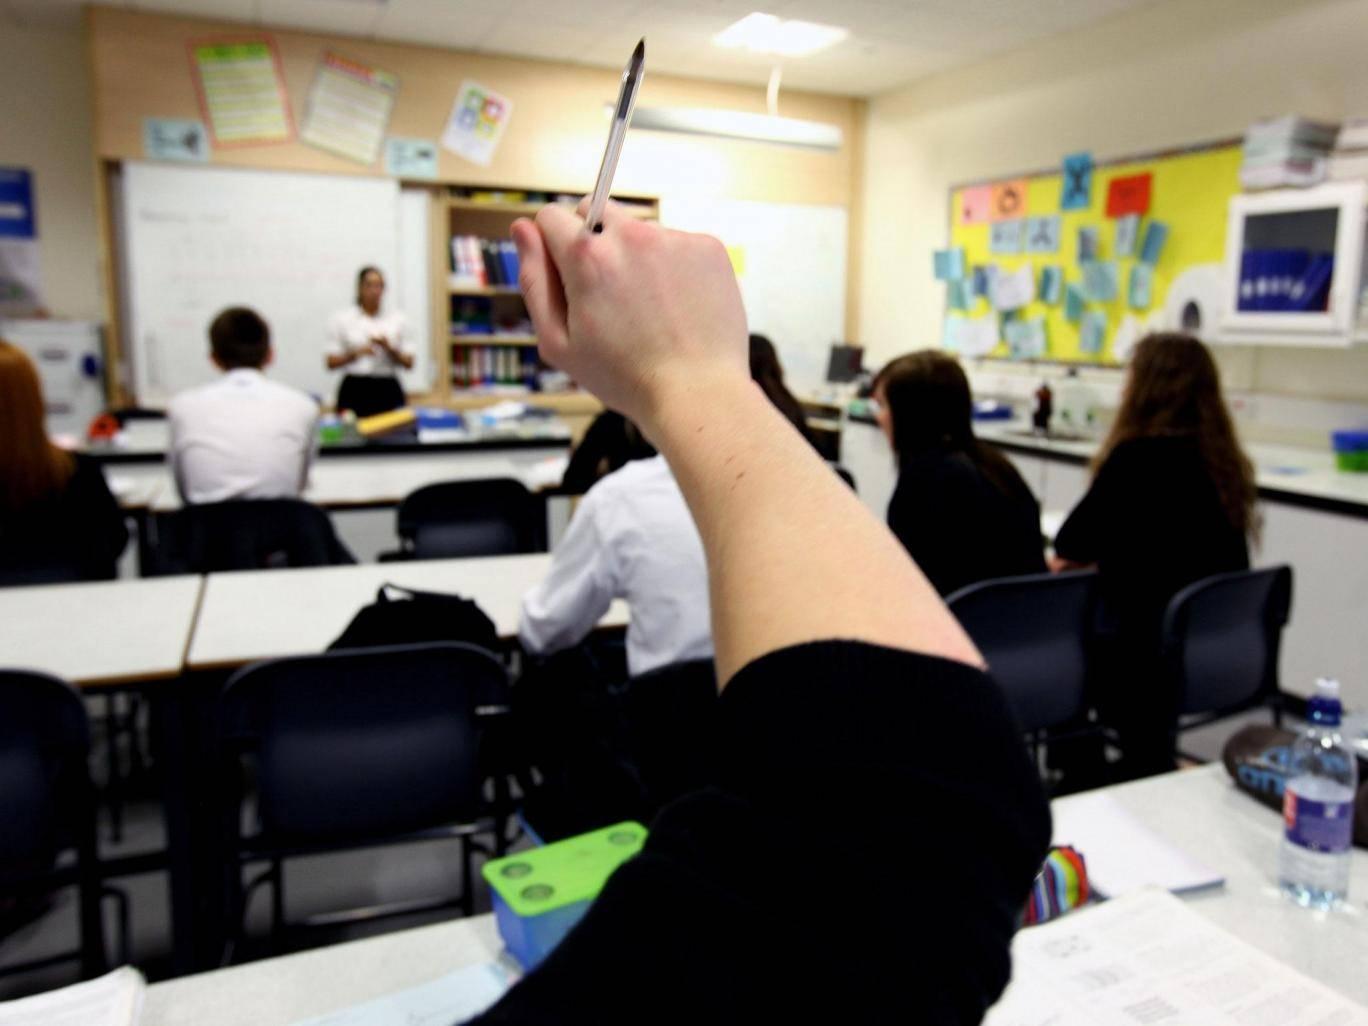 Education Secretary Damian Hinds is expected to announce a review into school exclusions this week, following a 12 per cent rise in the number of fixed-period exclusions across schools